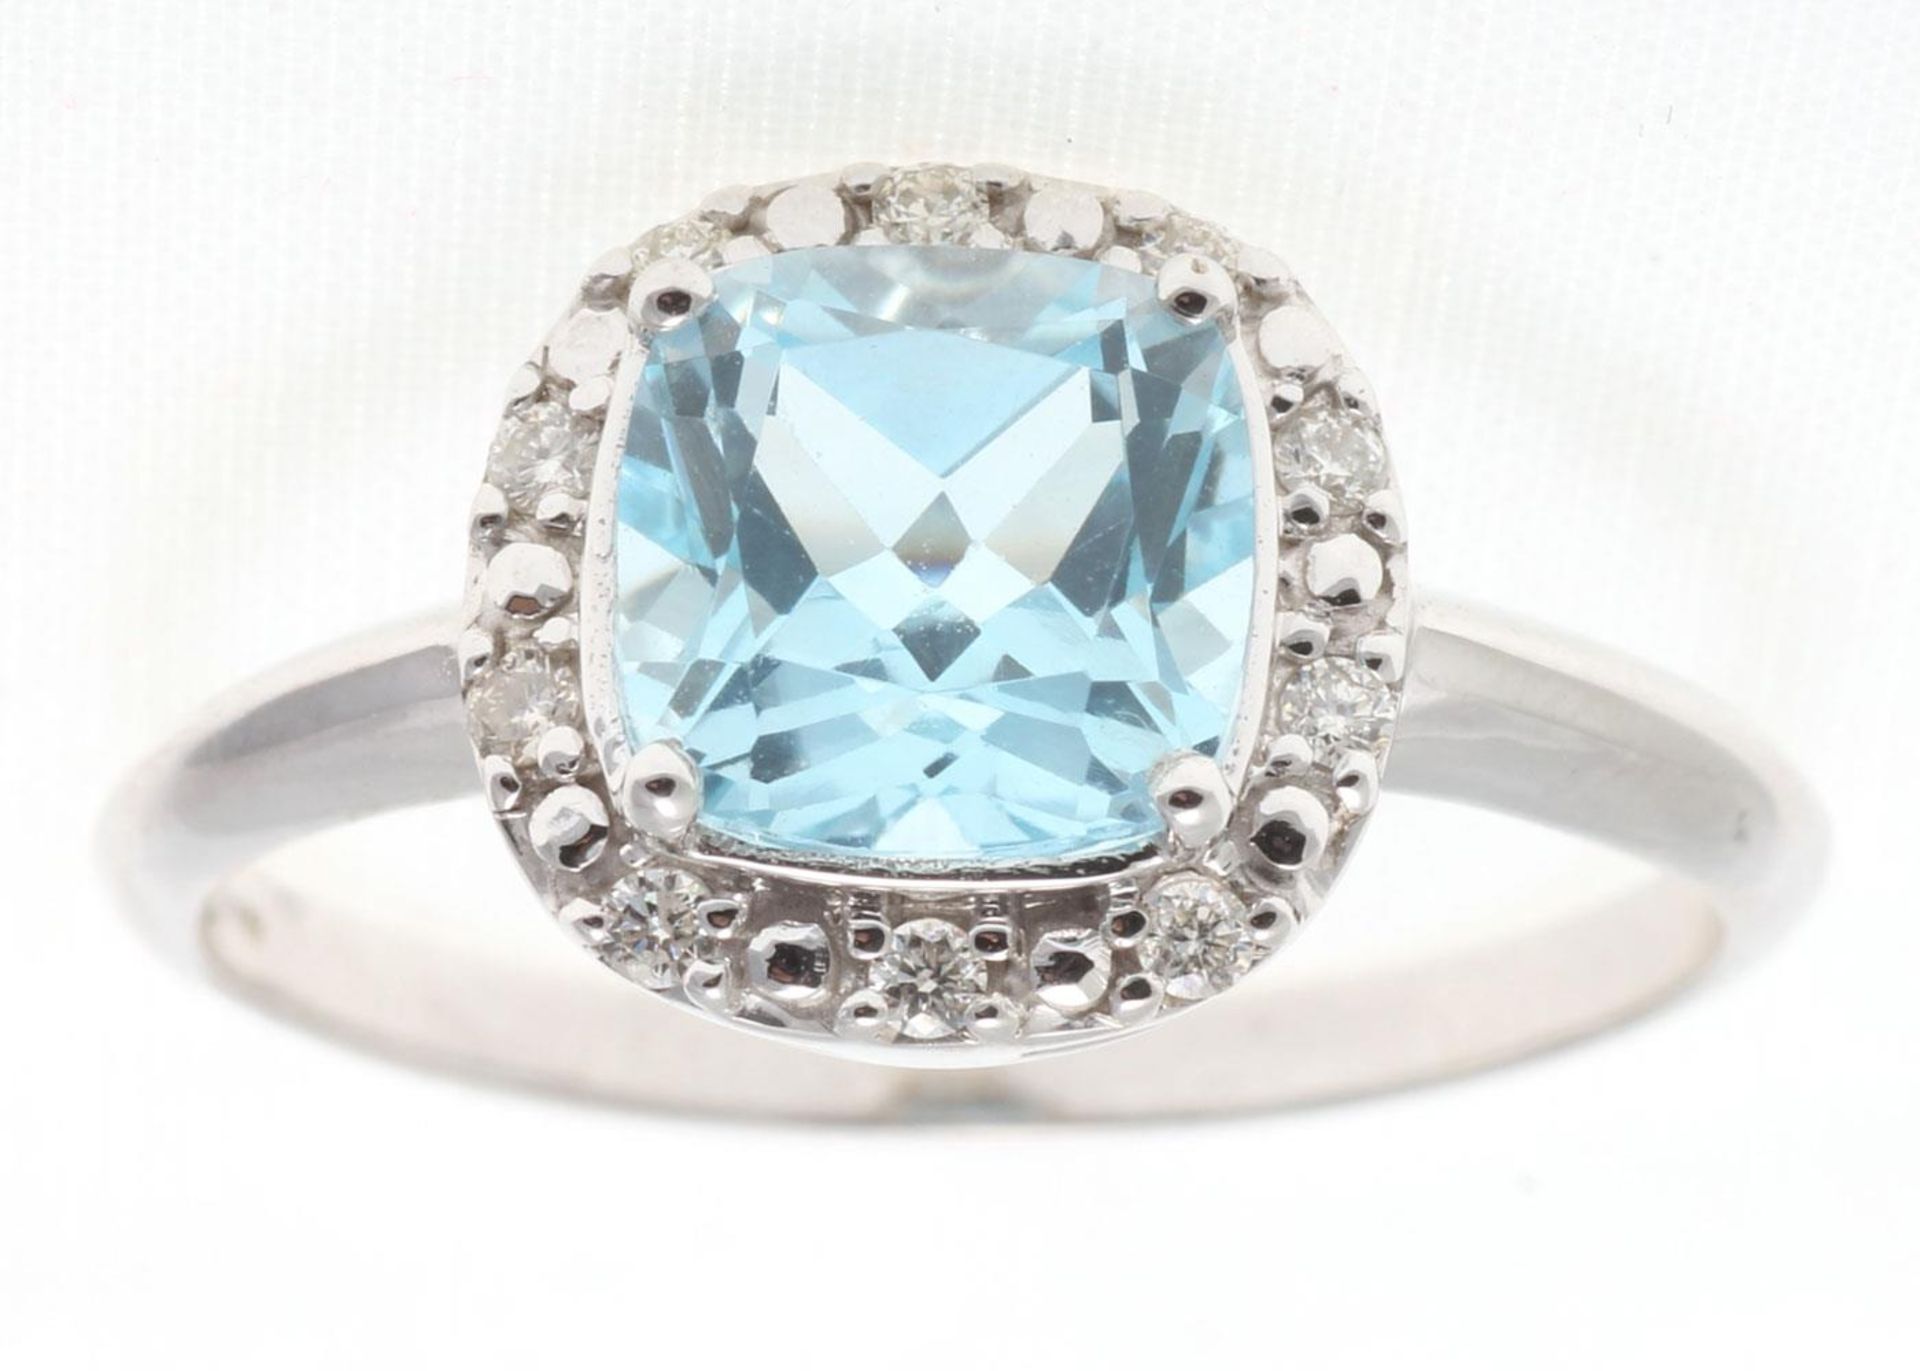 9ct White Gold Diamond And Blue Topaz Ring 0.10 Carats - Valued by GIE £1,920.00 - A stunning - Image 6 of 9